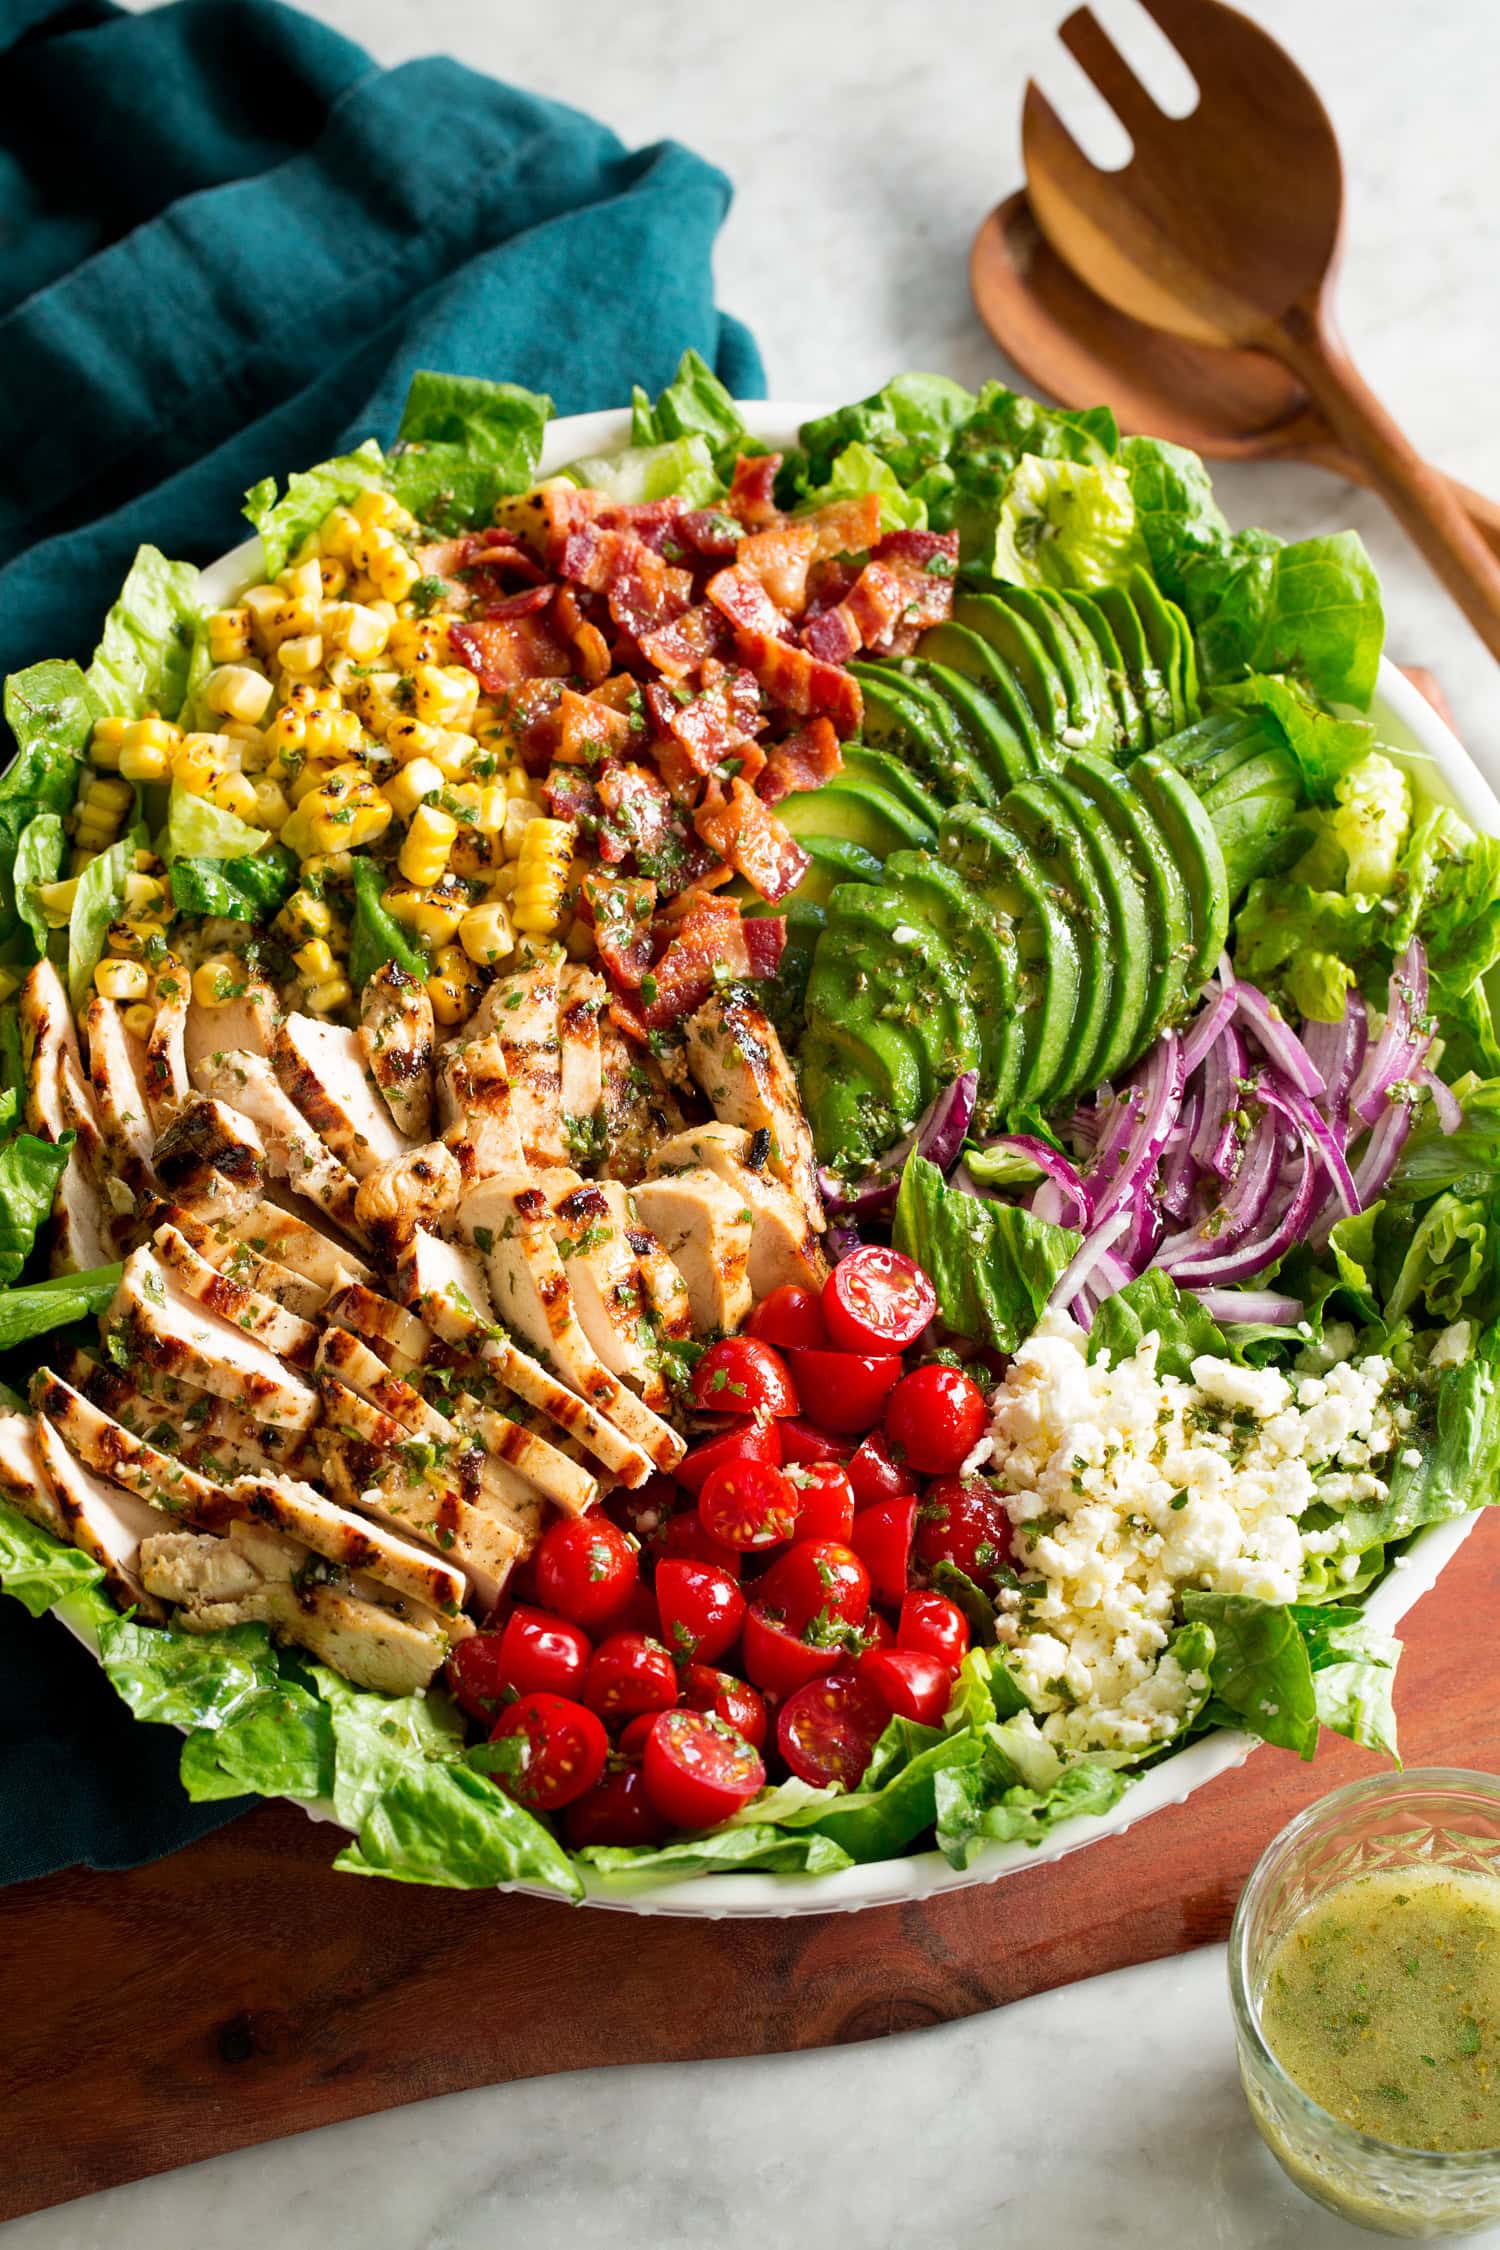 Grilled chicken salad with chicken, bacon, tomatoes, corn, avocado, romaine, red onion and feta.